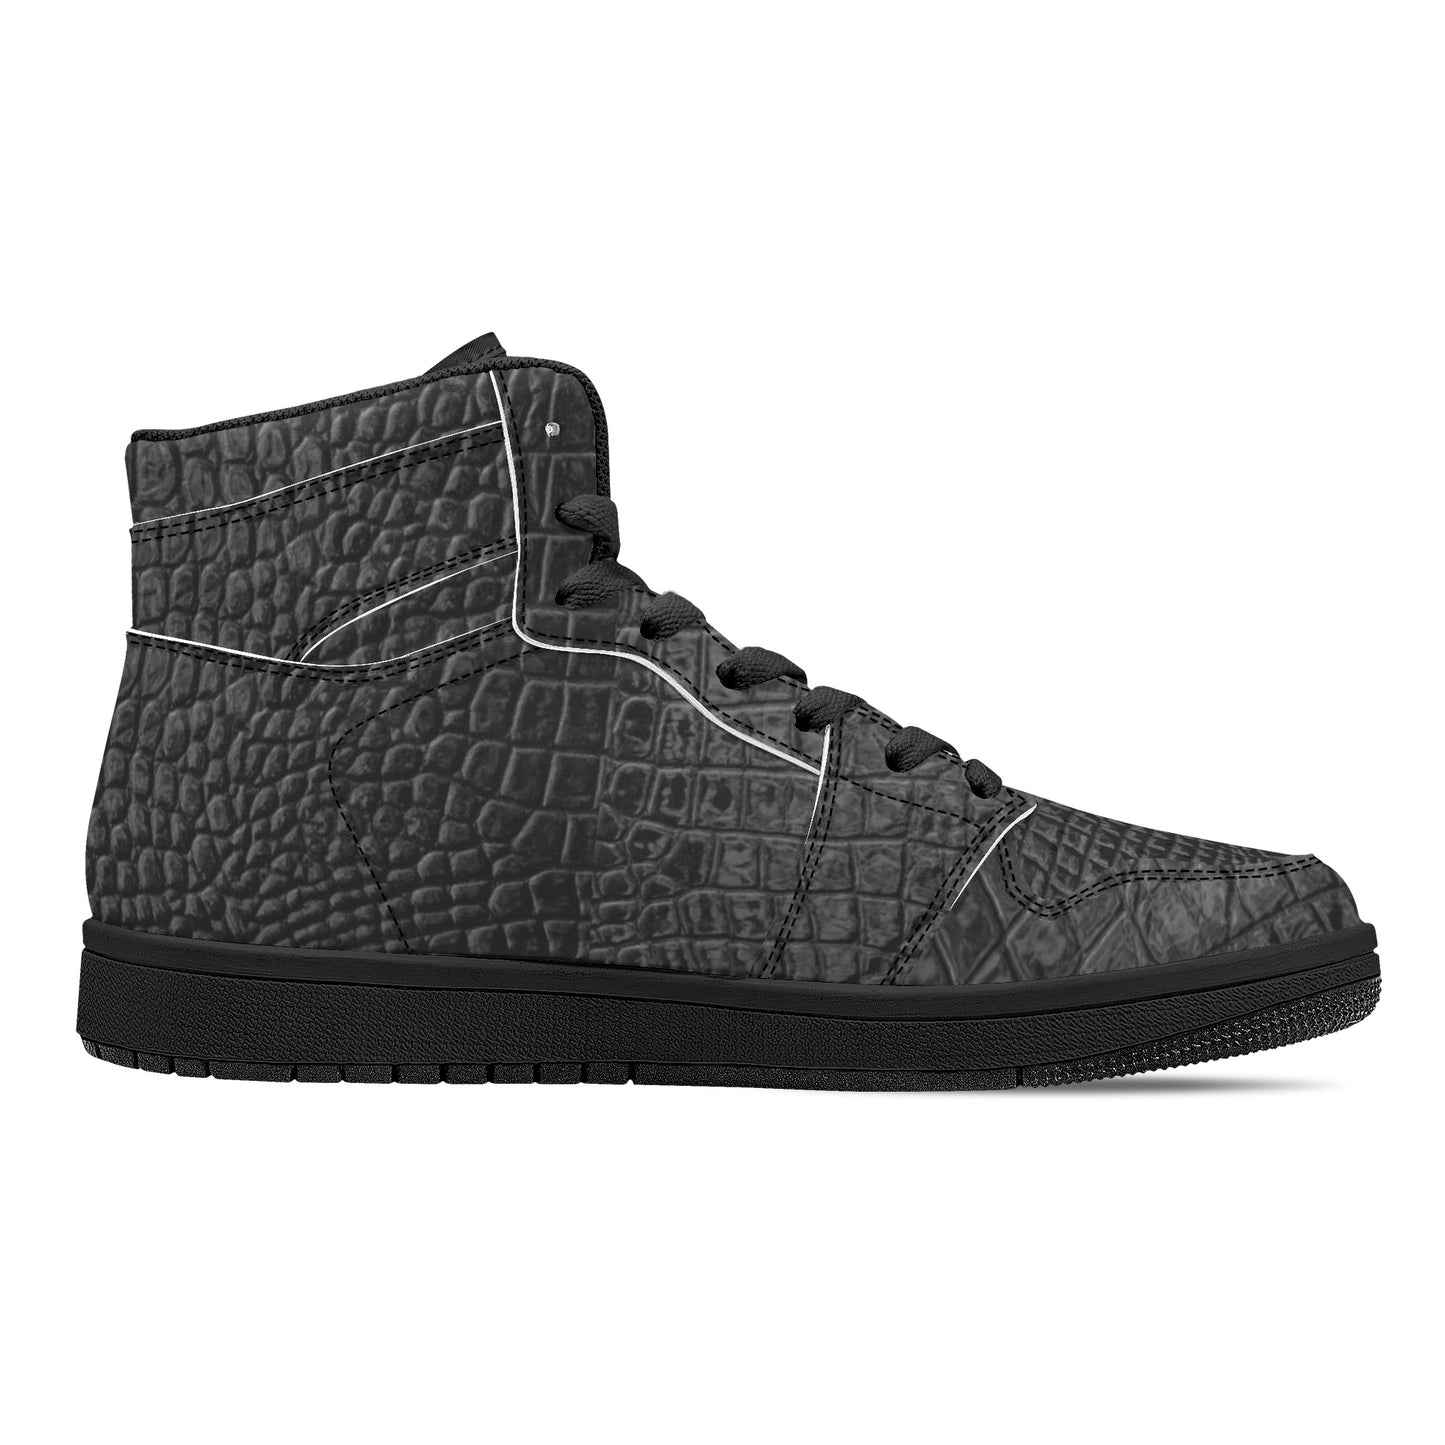 Men's High Top Leather